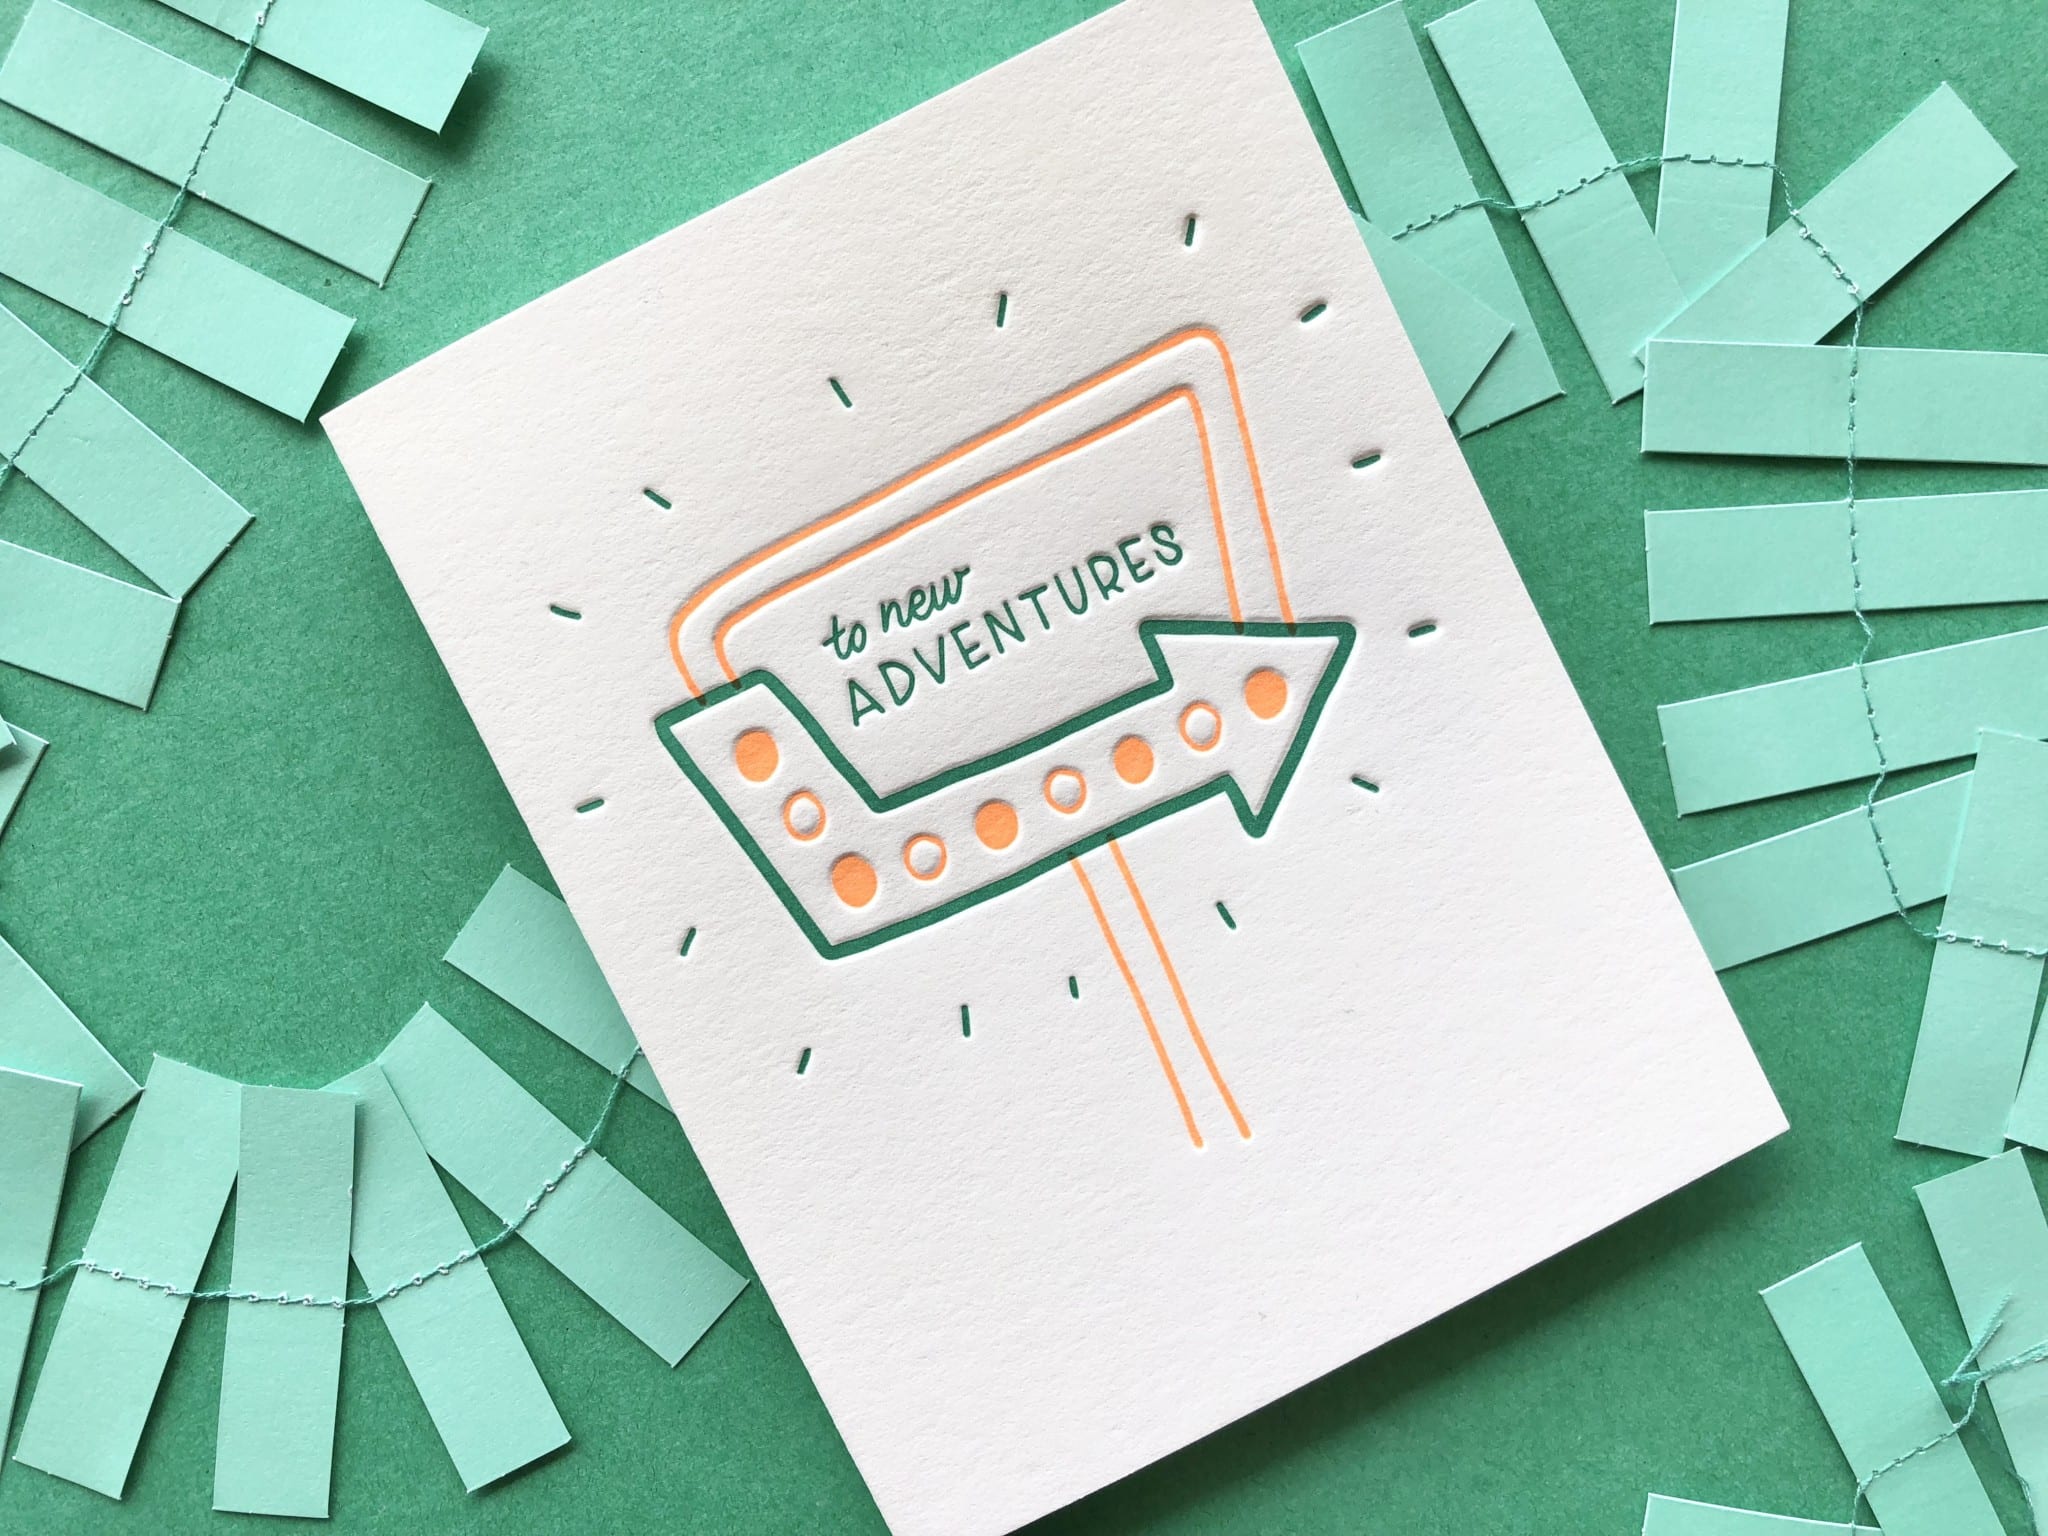 Greeting card on green background with green paper garland.